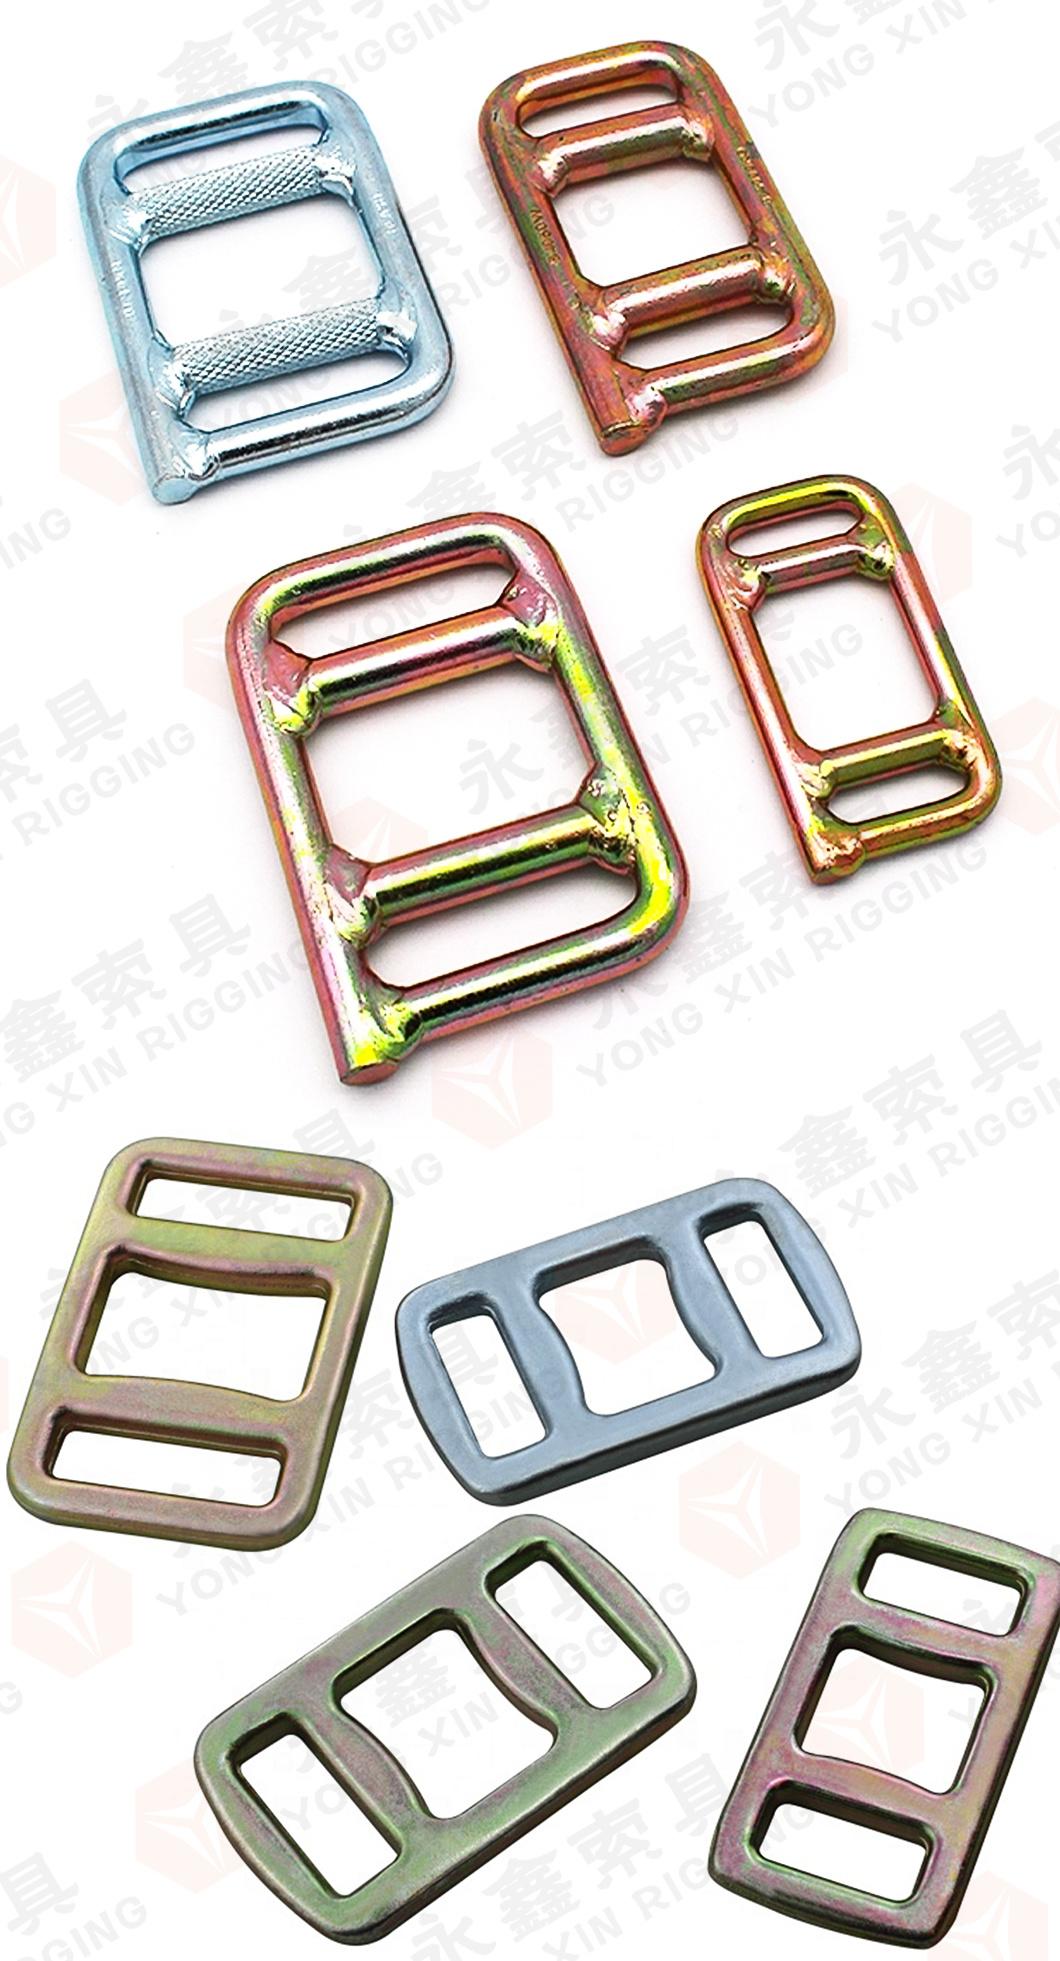 China Cheap Forged Lashing Square Buckle for Woven Polyester Lashing Strap